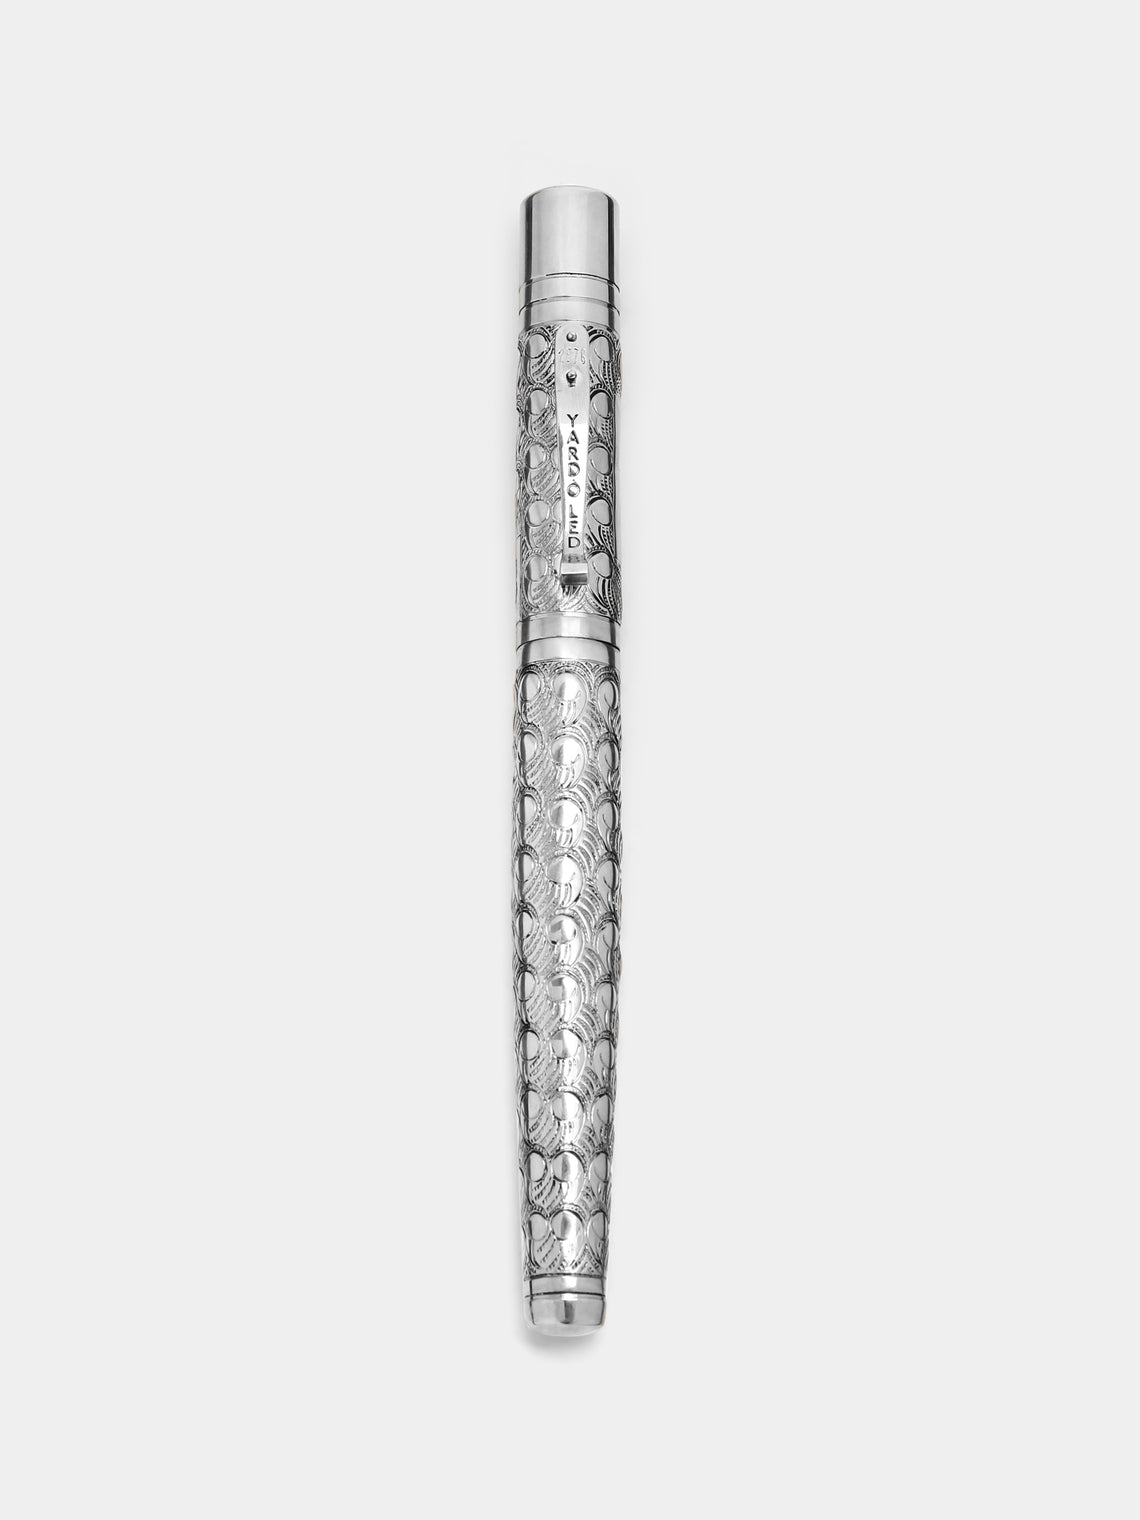 Yard O Led - Viceroy Grand Victorian Sterling Silver Fountain Pen - Silver - ABASK - 